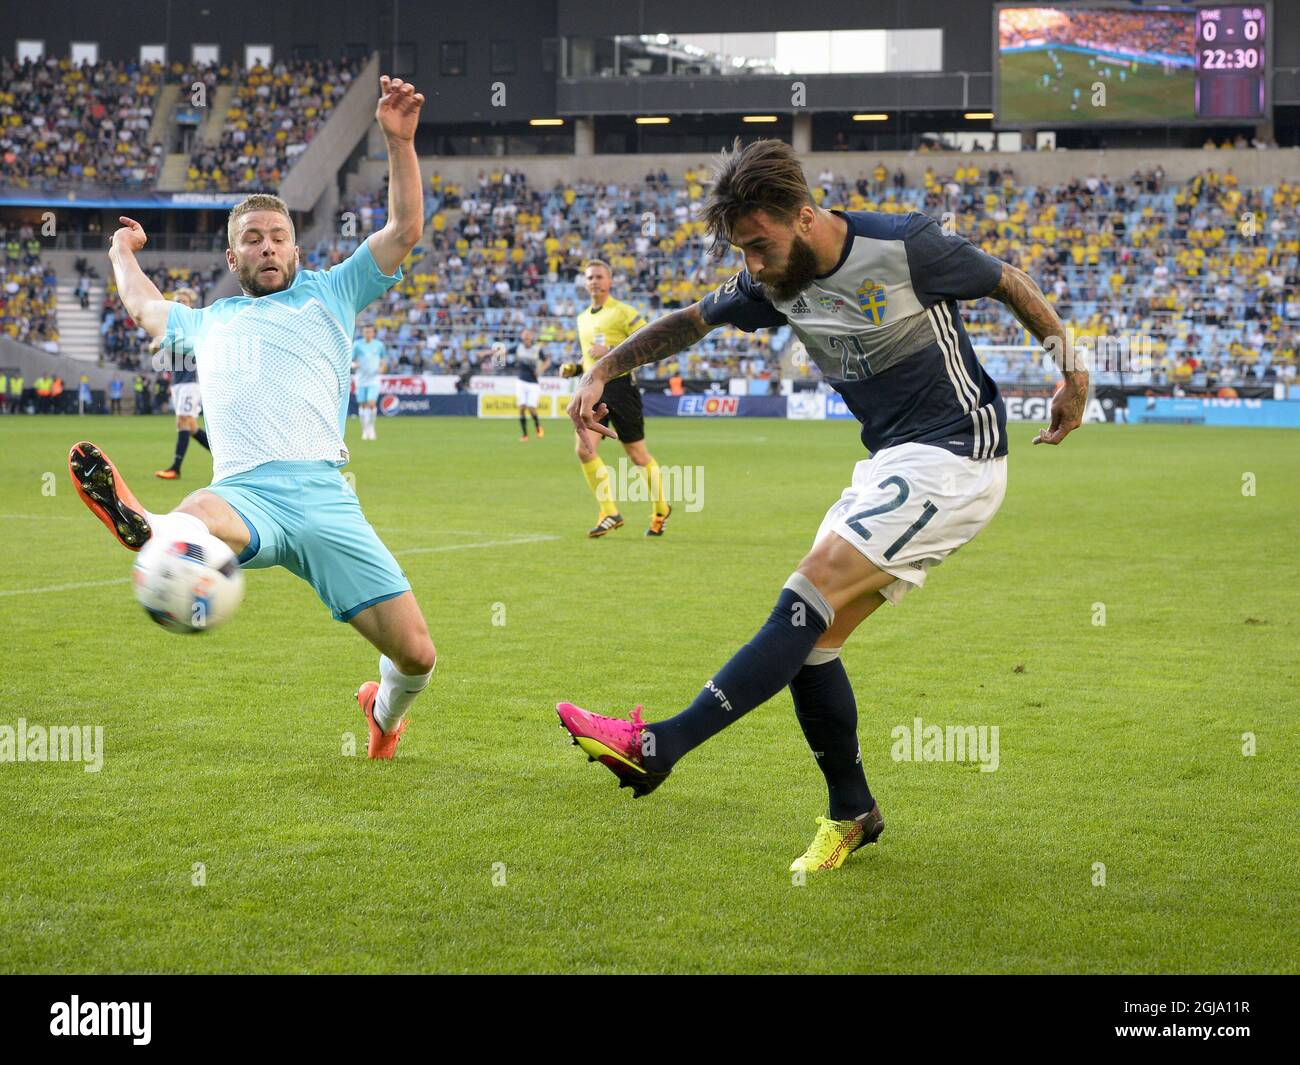 Slovenia's Nejc Skubic (L) fight for the ball against Sweden's Jimmy Durmaz during the friendly soccer match betweeen Sweden and Slovenia at Swedbank Stadion in Malmo, Sweden, on May 30, 2016. Photo: Anders Wiklund / TT / code 10040  Stock Photo